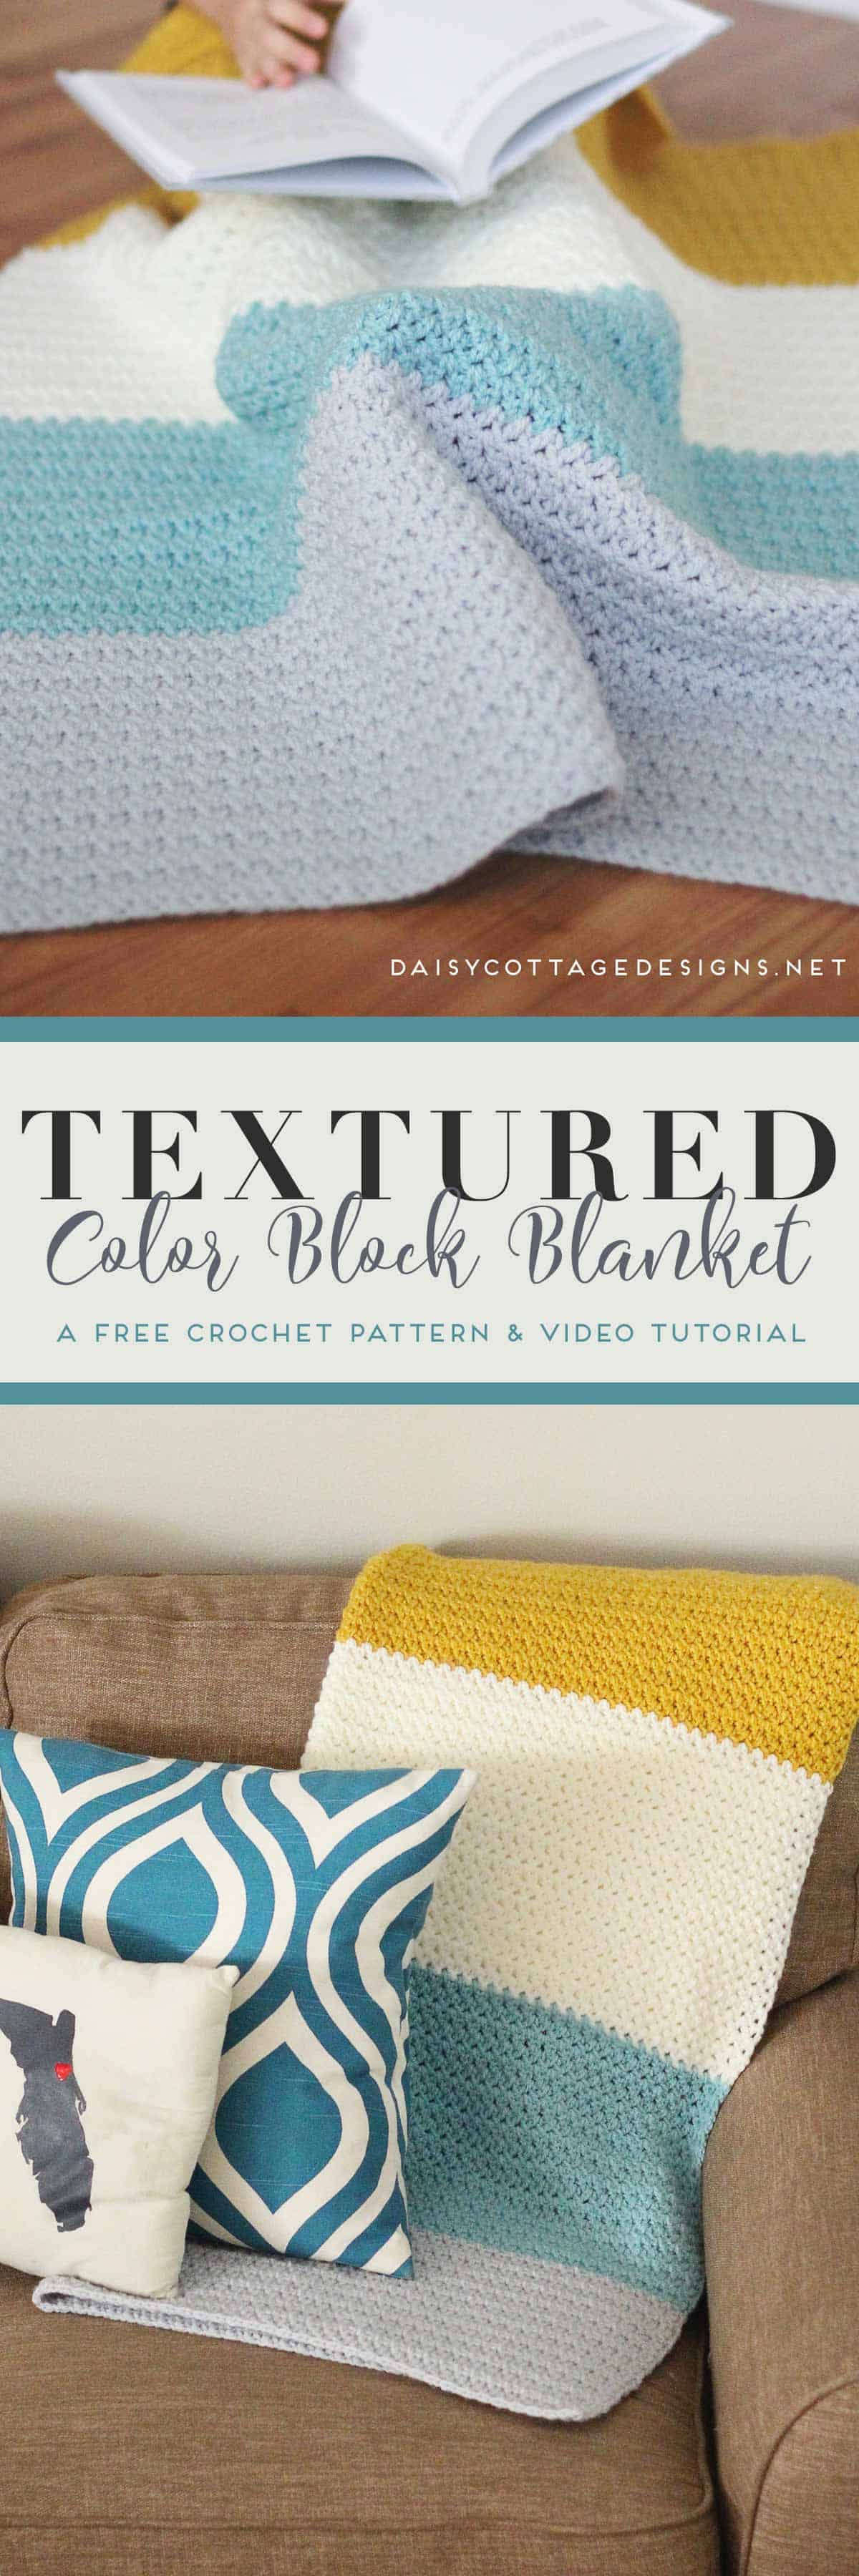 Use this free crochet blanket pattern from Daisy Cottage Designs to create a color block blanket for your next project. Video tutorial & chart included. | color block crochet blanket, Daisy Cottage Designs crochet pattern, blanket crochet pattern free, easy crochet blanket pattern, crochet tutorial